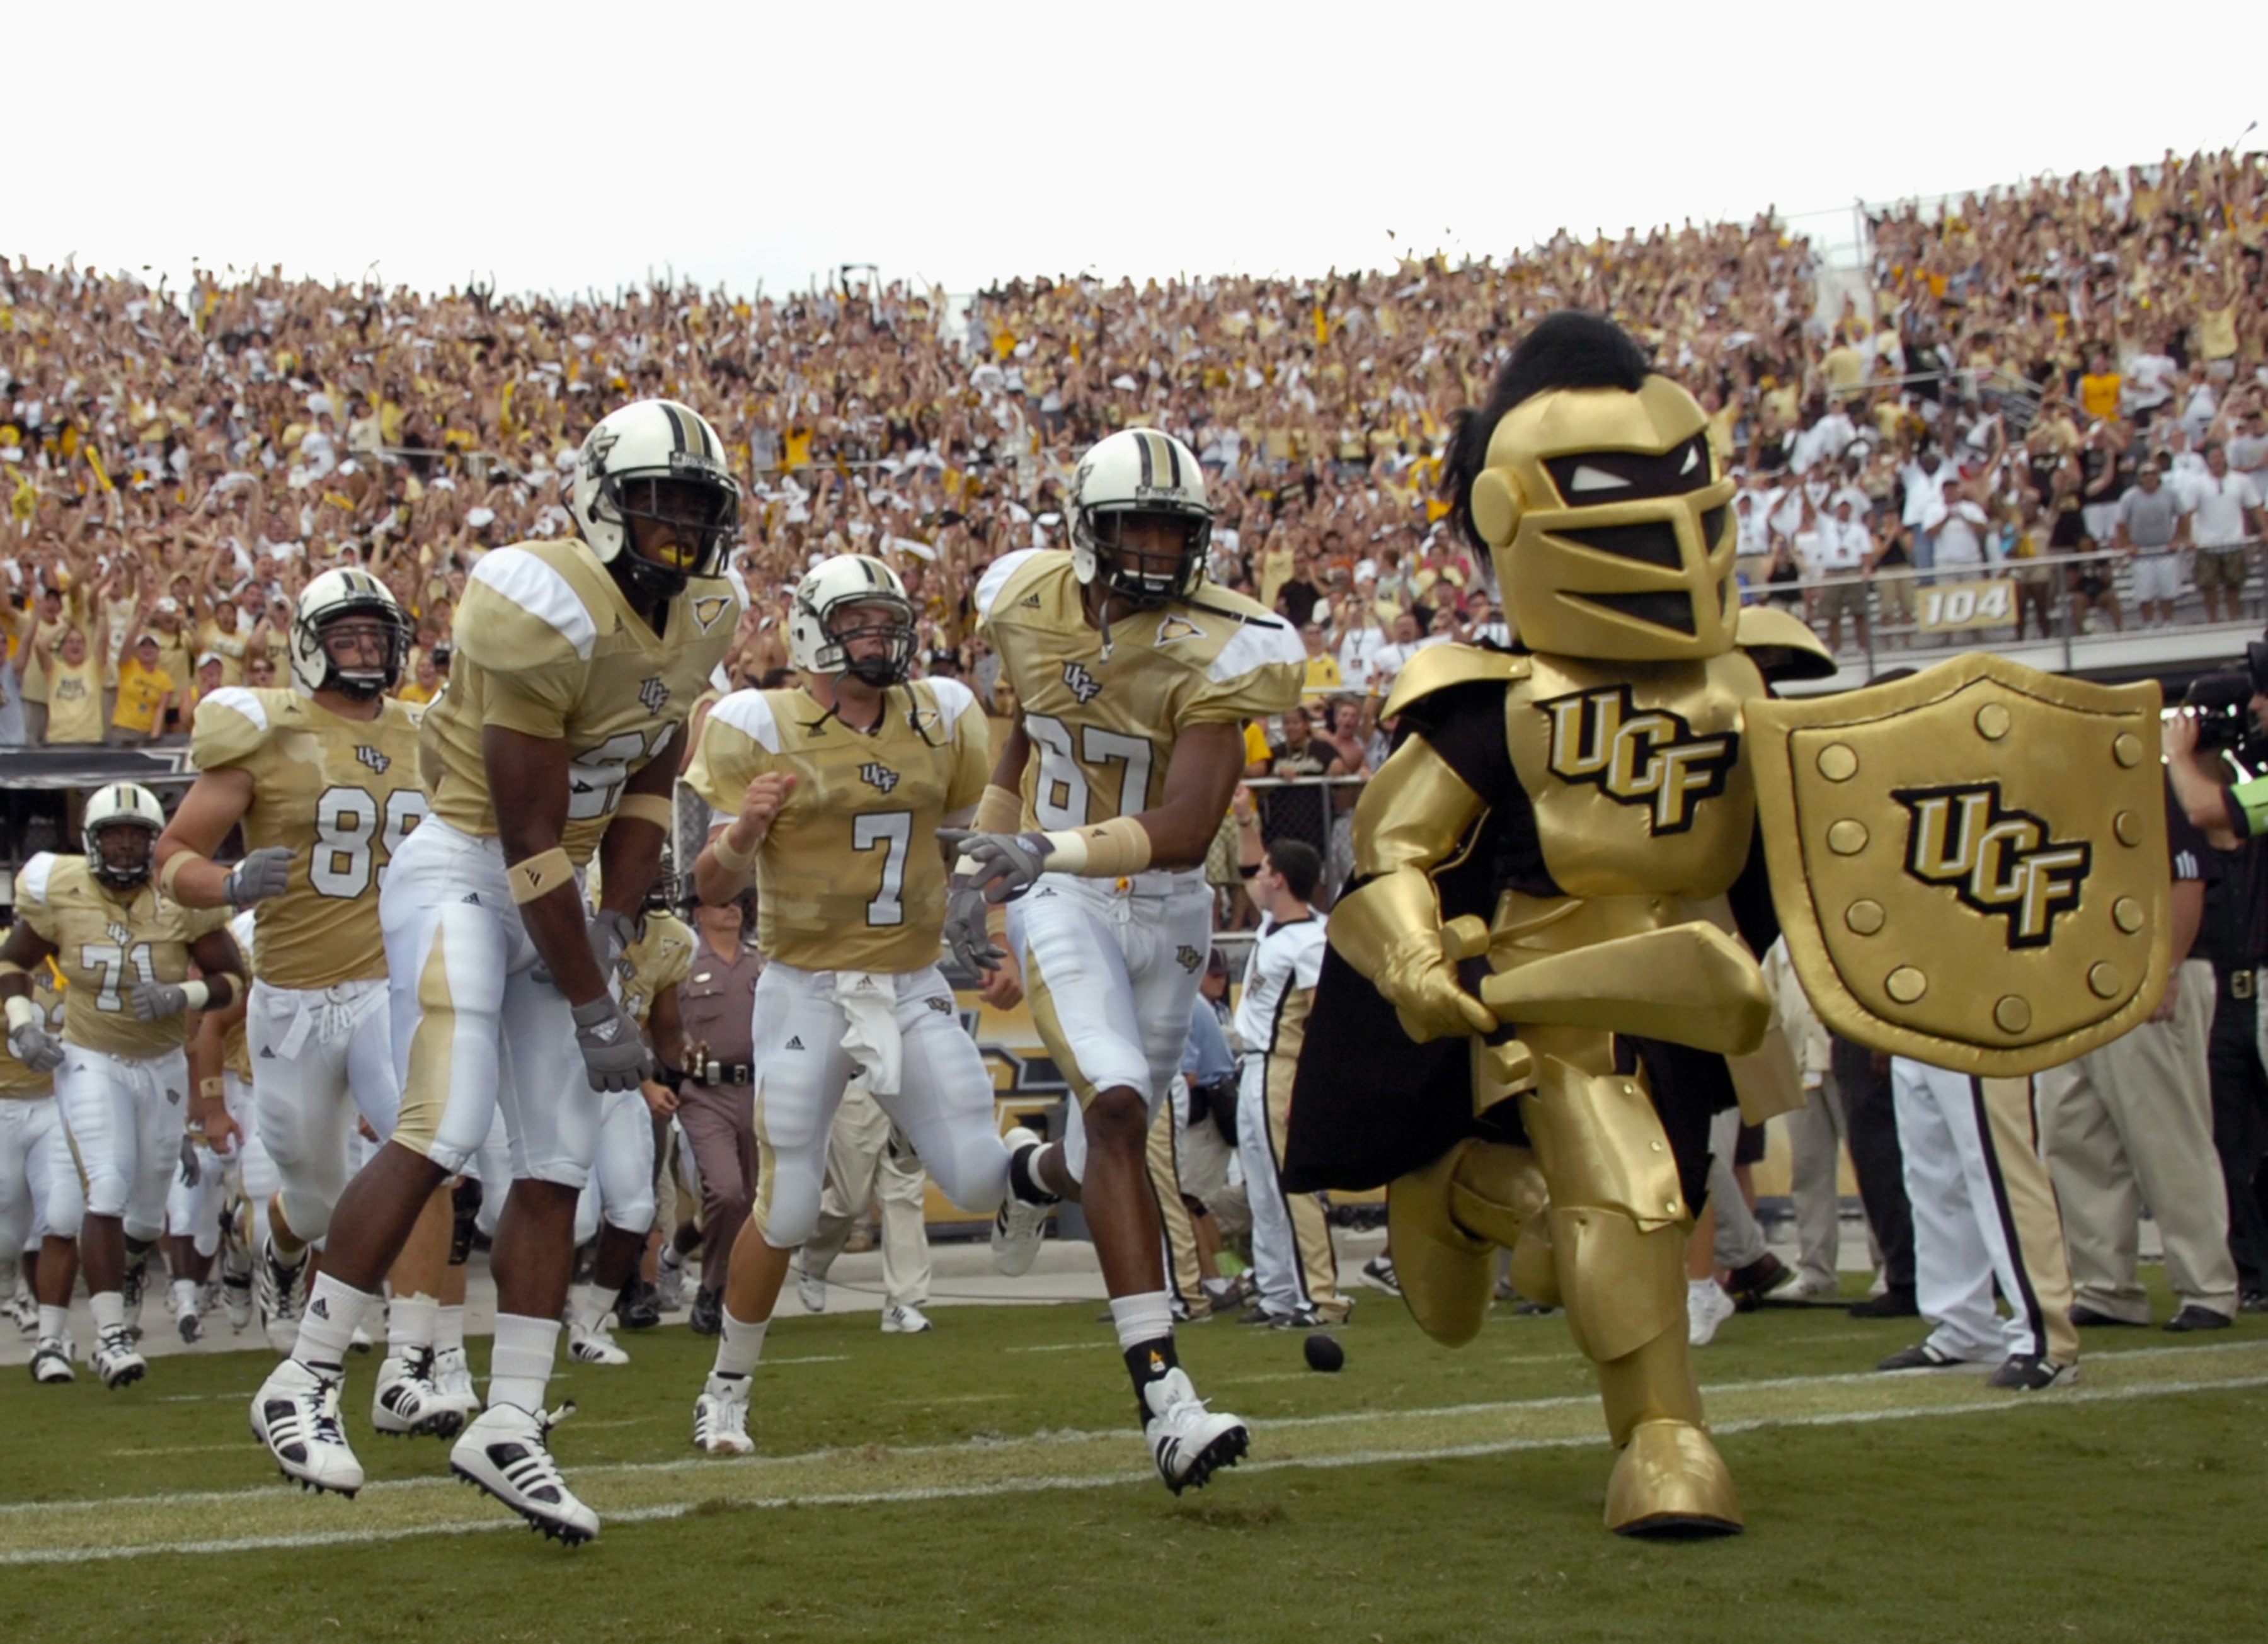 ORLANDO, FL - SEPTEMBER 15: The University of Central Florida Knights are led onto the field by their mascot before play against the Texas Longhorns during the first game at the new Bright House Networks Stadium on September 15, 2007 in Orlando, Florida.